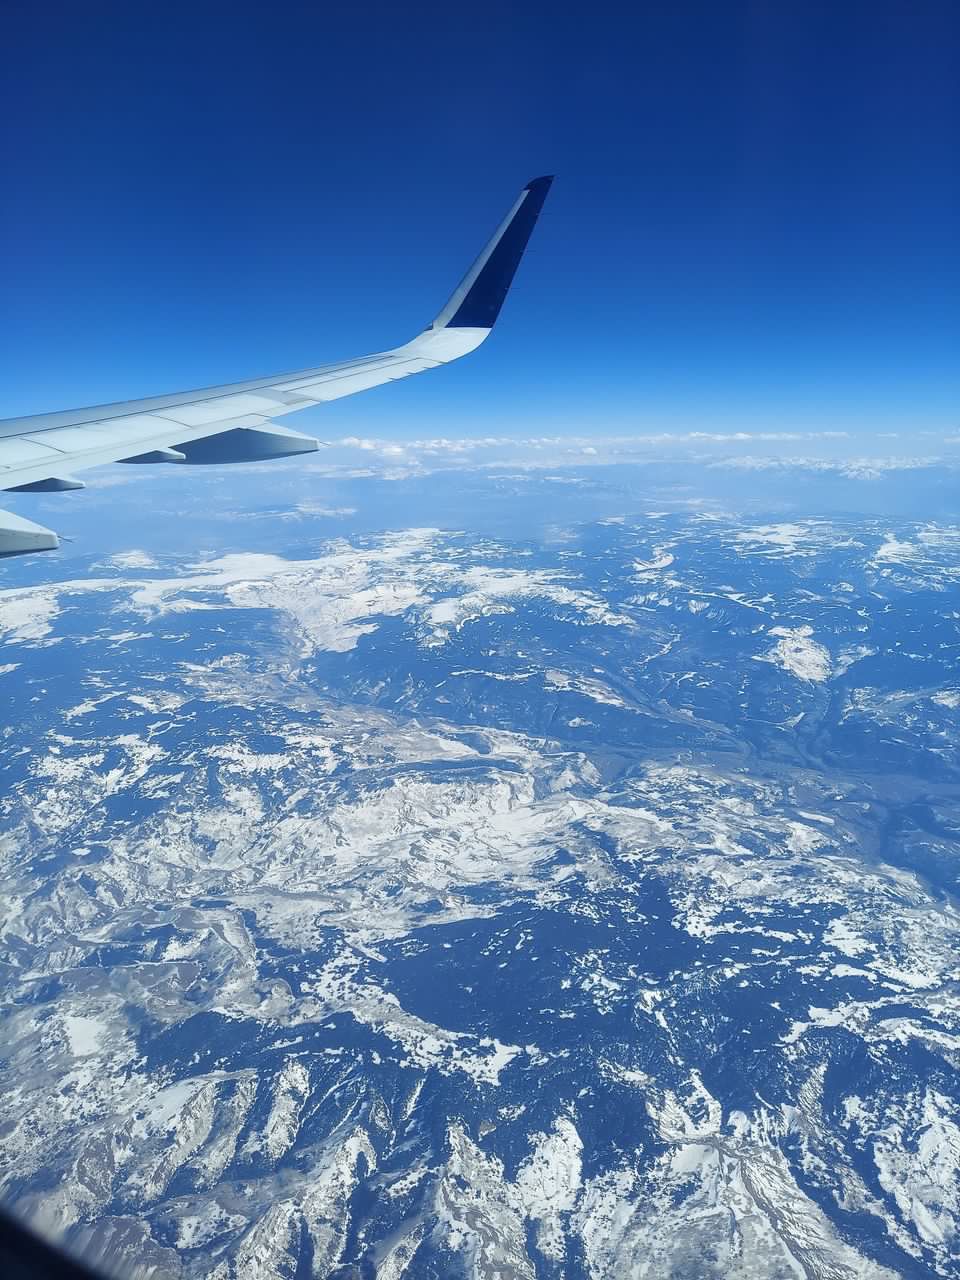 View of snow-capped mountains from an airplane, with the wing of the plane visible.